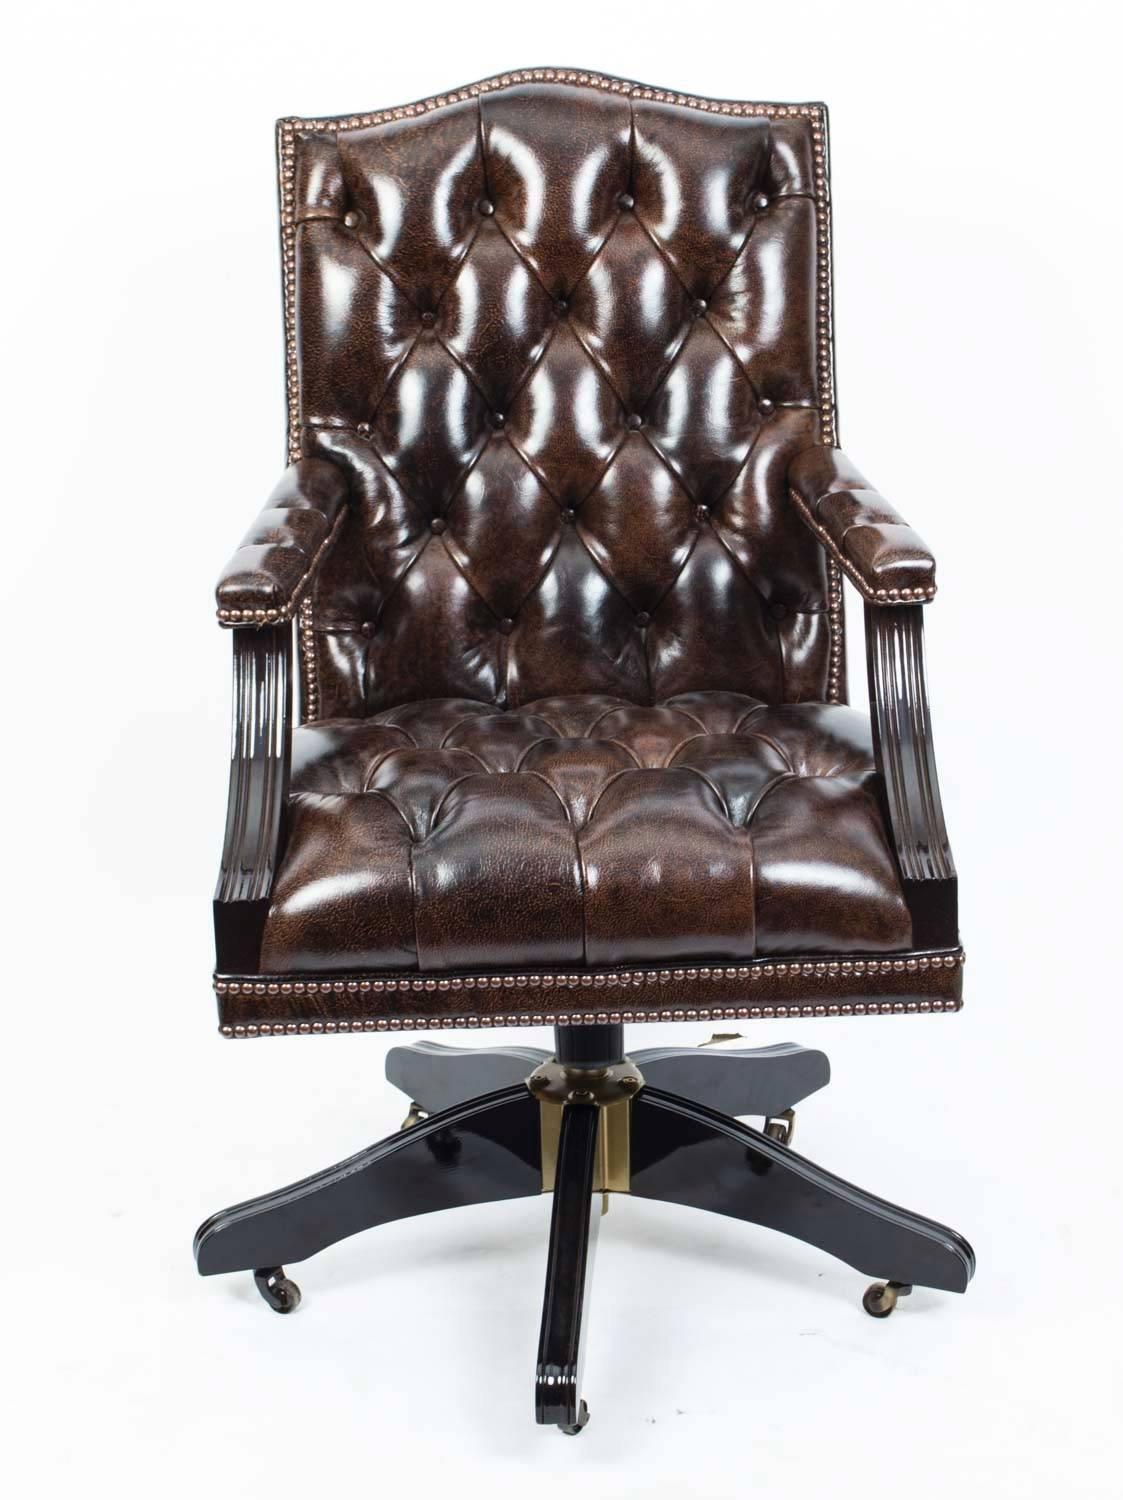 This is an absolutely stunning leather 'Gainsborough chair' hand-made in England with materials of the finest quality. 

It is upholstered in very decorative top quality Italian designer cow hide and the studding is achieved with close individual